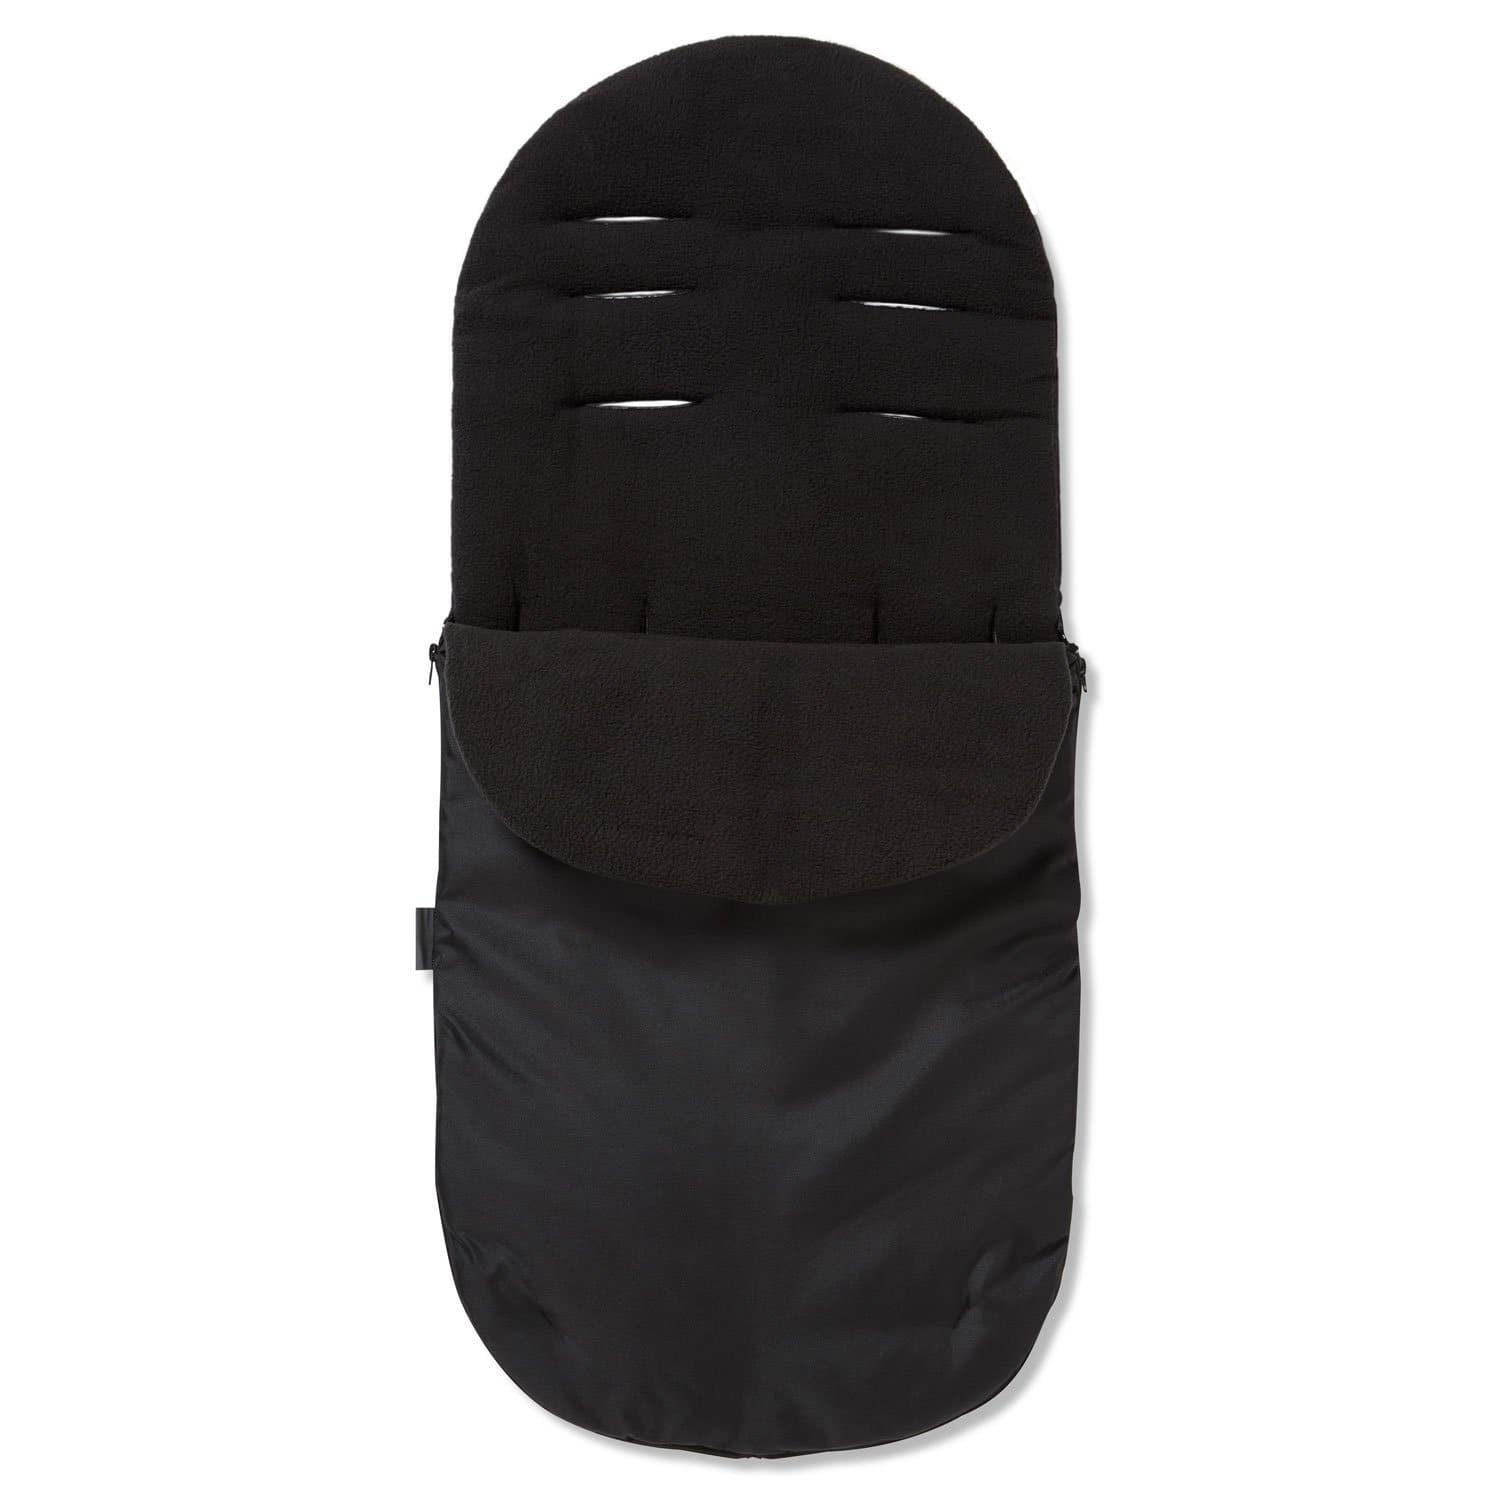 Footmuff / Cosy Toes Compatible with Egg - Black / Fits All Models | For Your Little One